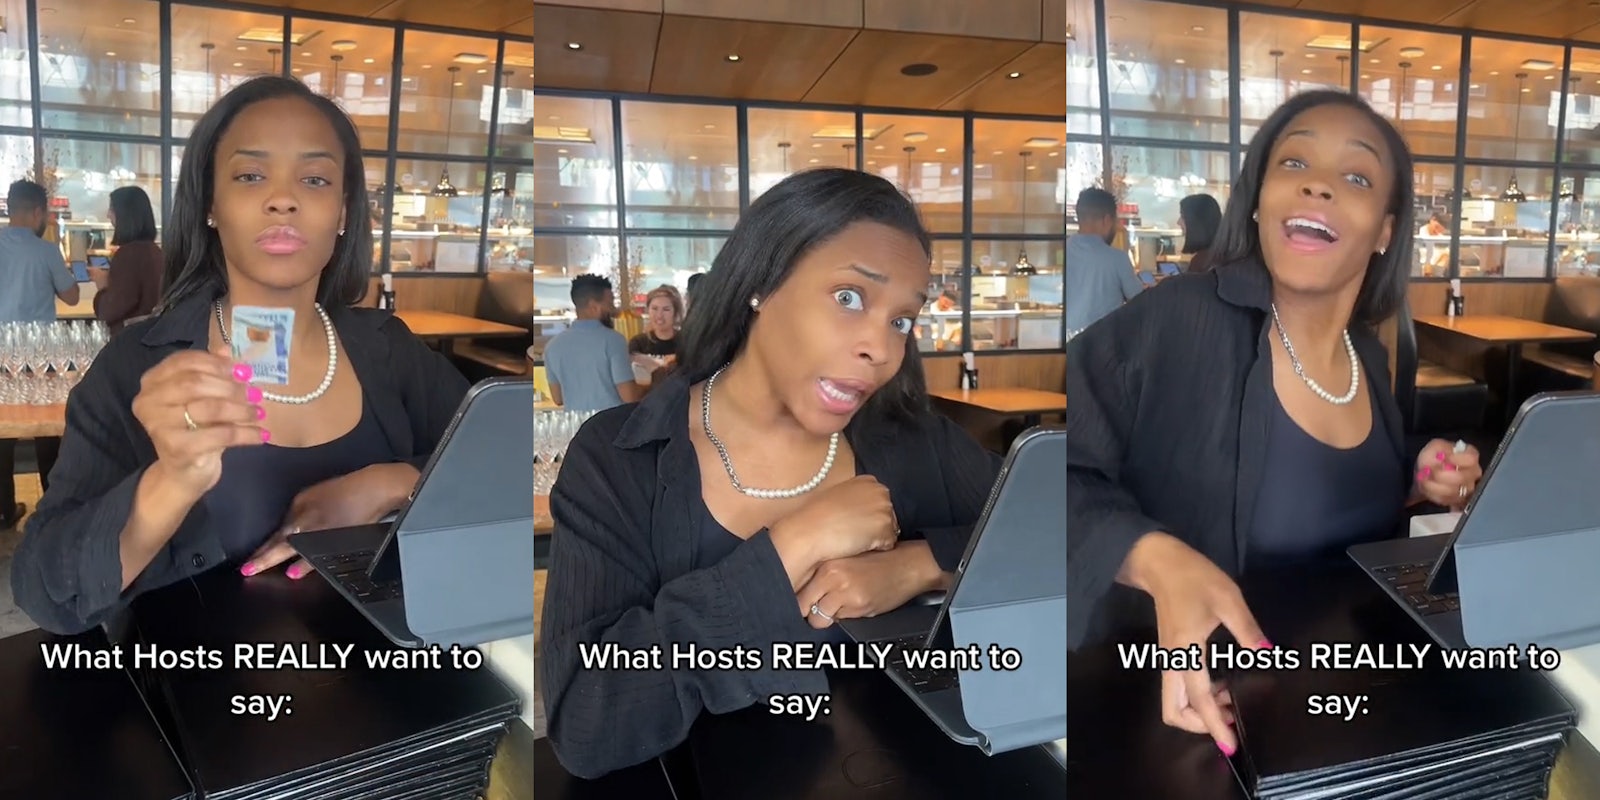 restaurant host holding cash with caption 'What Hosts REALLY want to say:' (l) restaurant host speaking with caption 'What Hosts REALLY want to say:' (c) restaurant host speaking with caption 'What Hosts REALLY want to say:' (r)